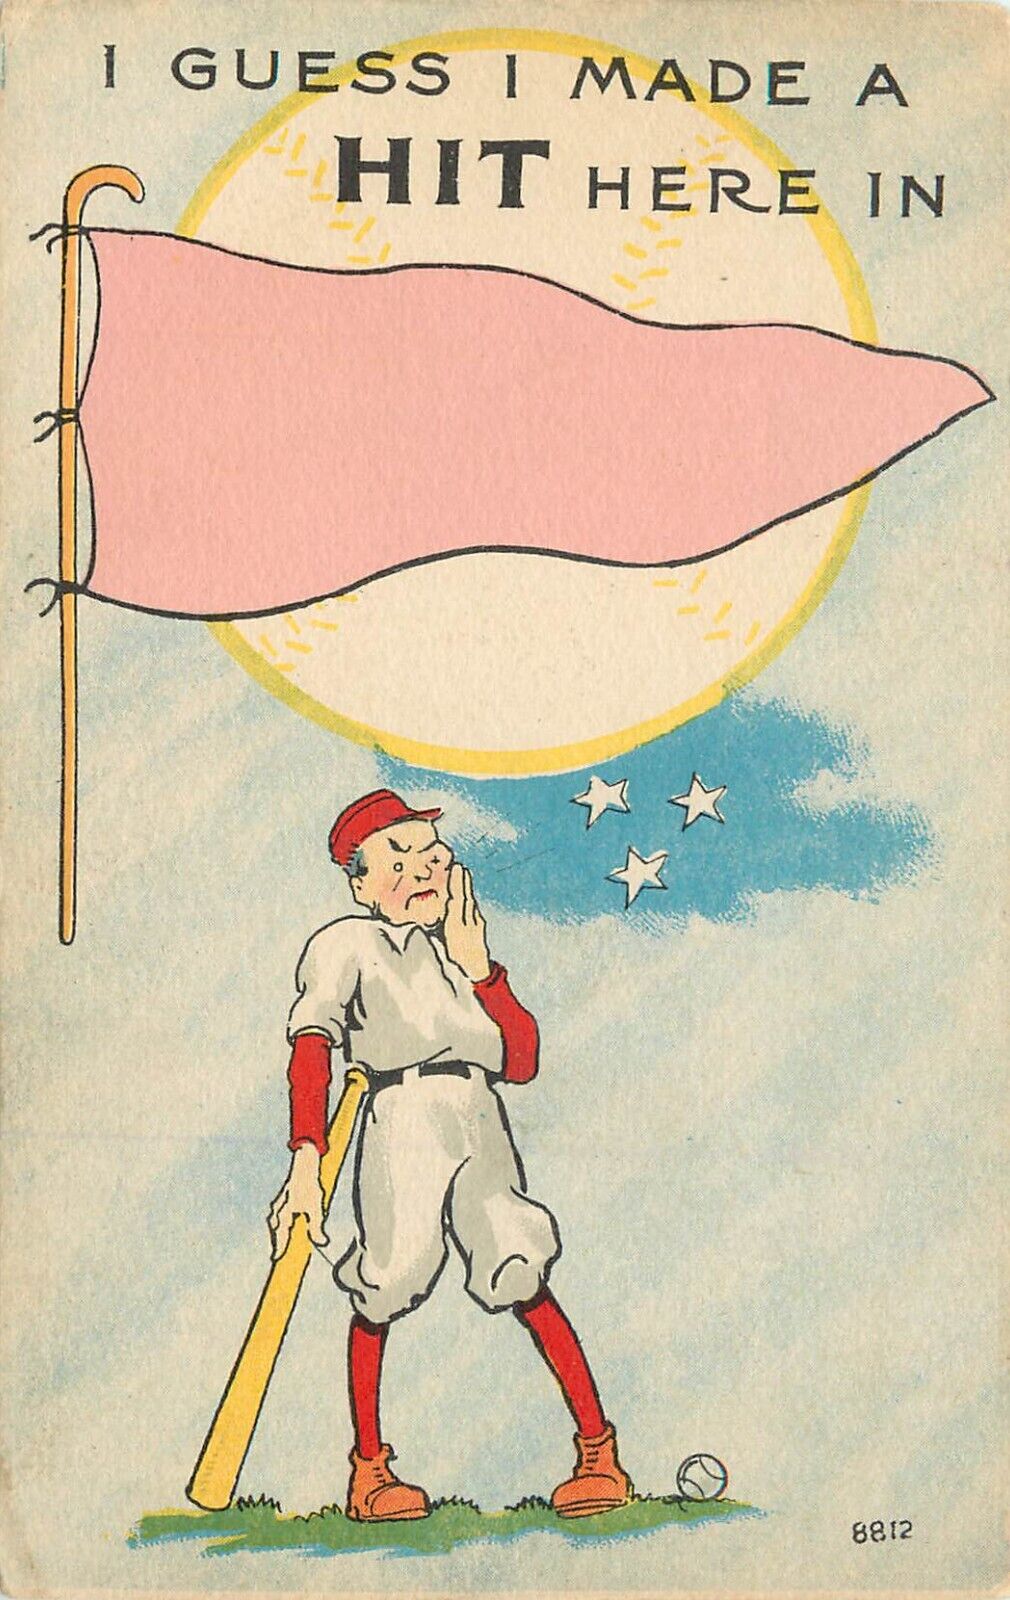 c1913 Postcard Baseball Player I Guess I Made a Hit Here in... Blank Flag 8812